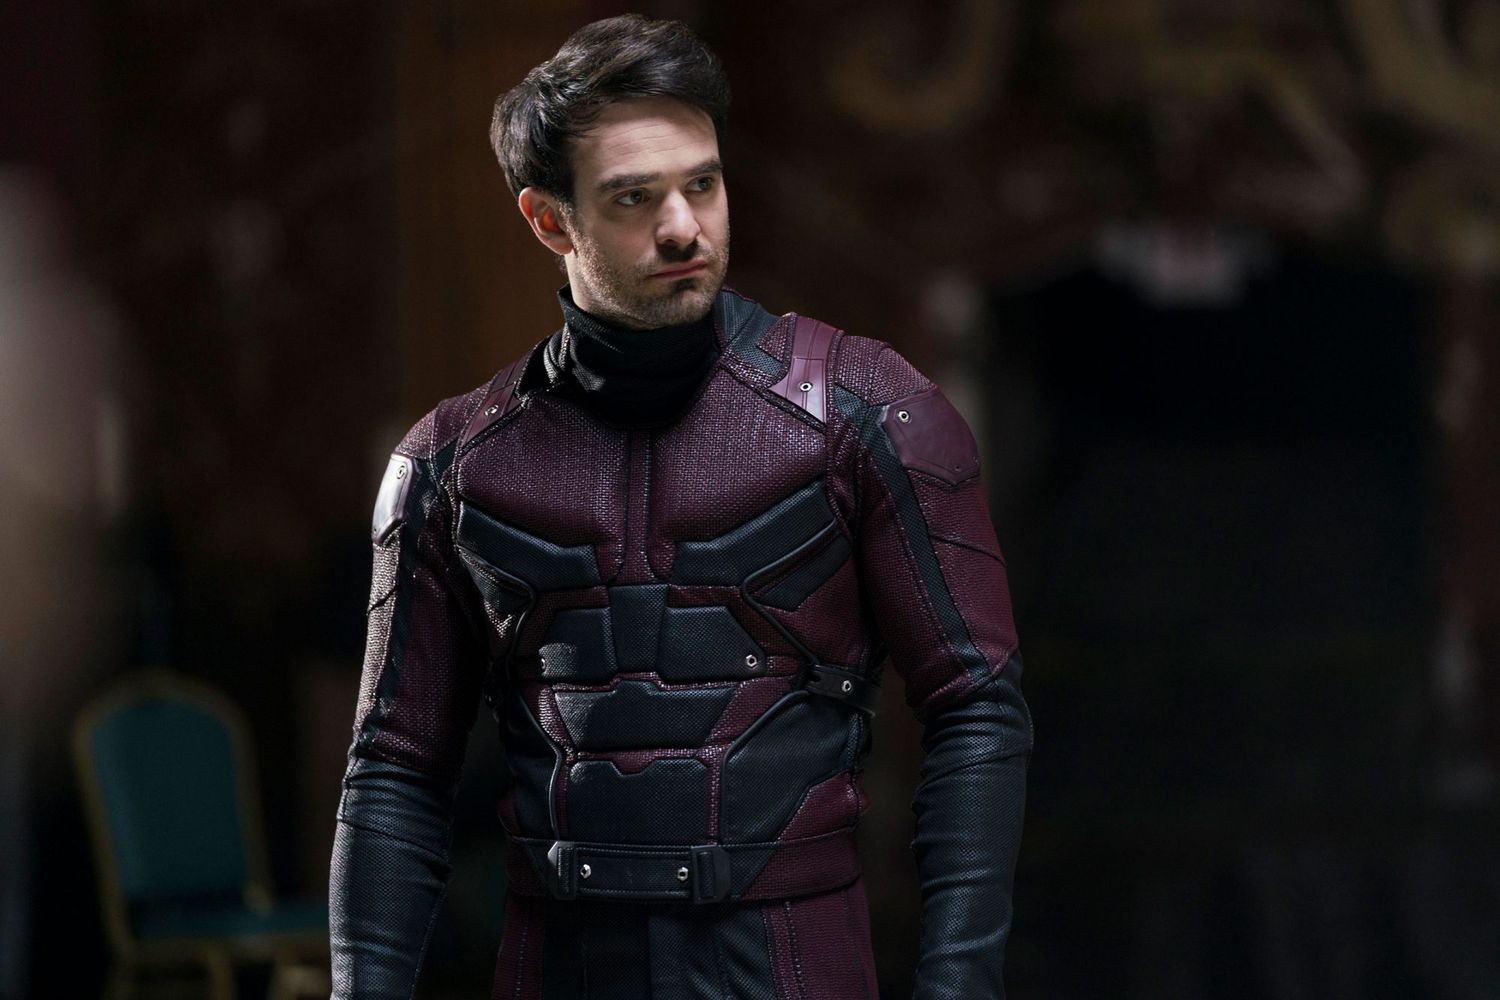 Confirmed: Charlie Cox Will Cross Over to the MCU as Daredevil